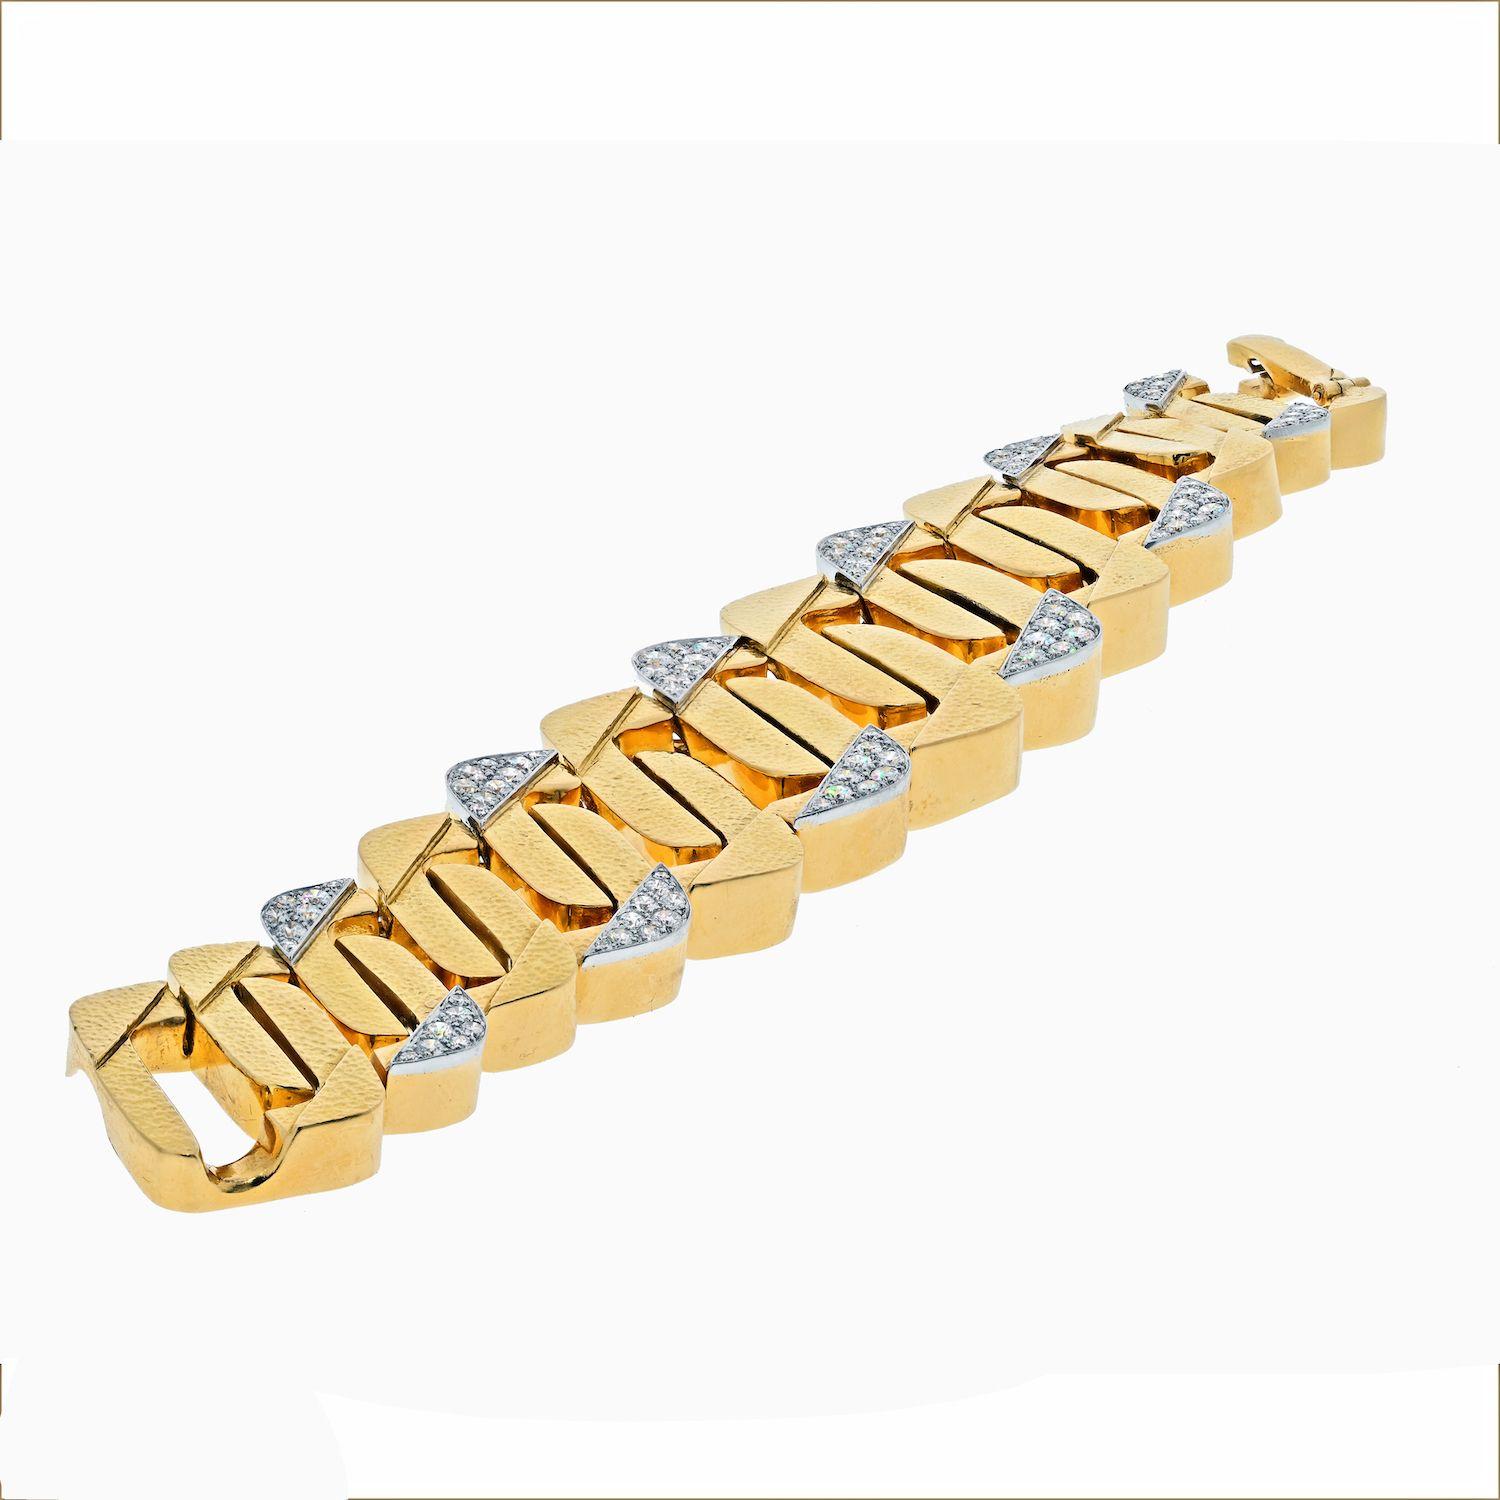 Curb-link bracelet in high-polished hammered finish 18k yellow gold, accented by round brilliant-cut diamonds set in platinum on the edges. 
TYPE: VINTAGE BRACELETS
EXACT DIAMOND WEIGHT: 12.00 CTS
Length: 7.5 inches approx. 
Thickness: 0.25